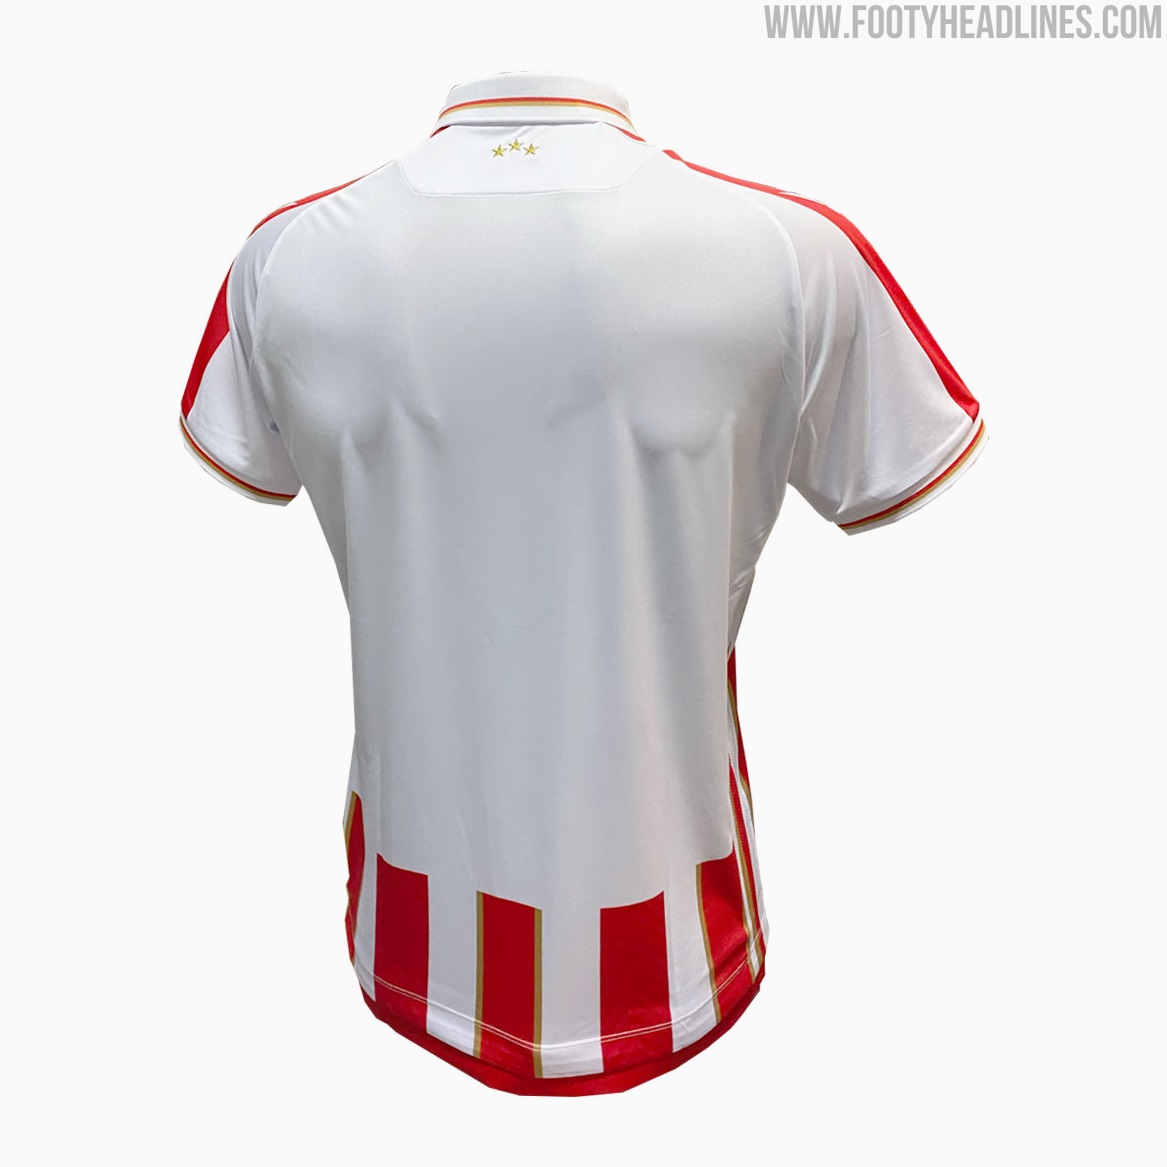 REQUESTED] Crvena Zvezda 21-22 3rd kit. +in game images, name and